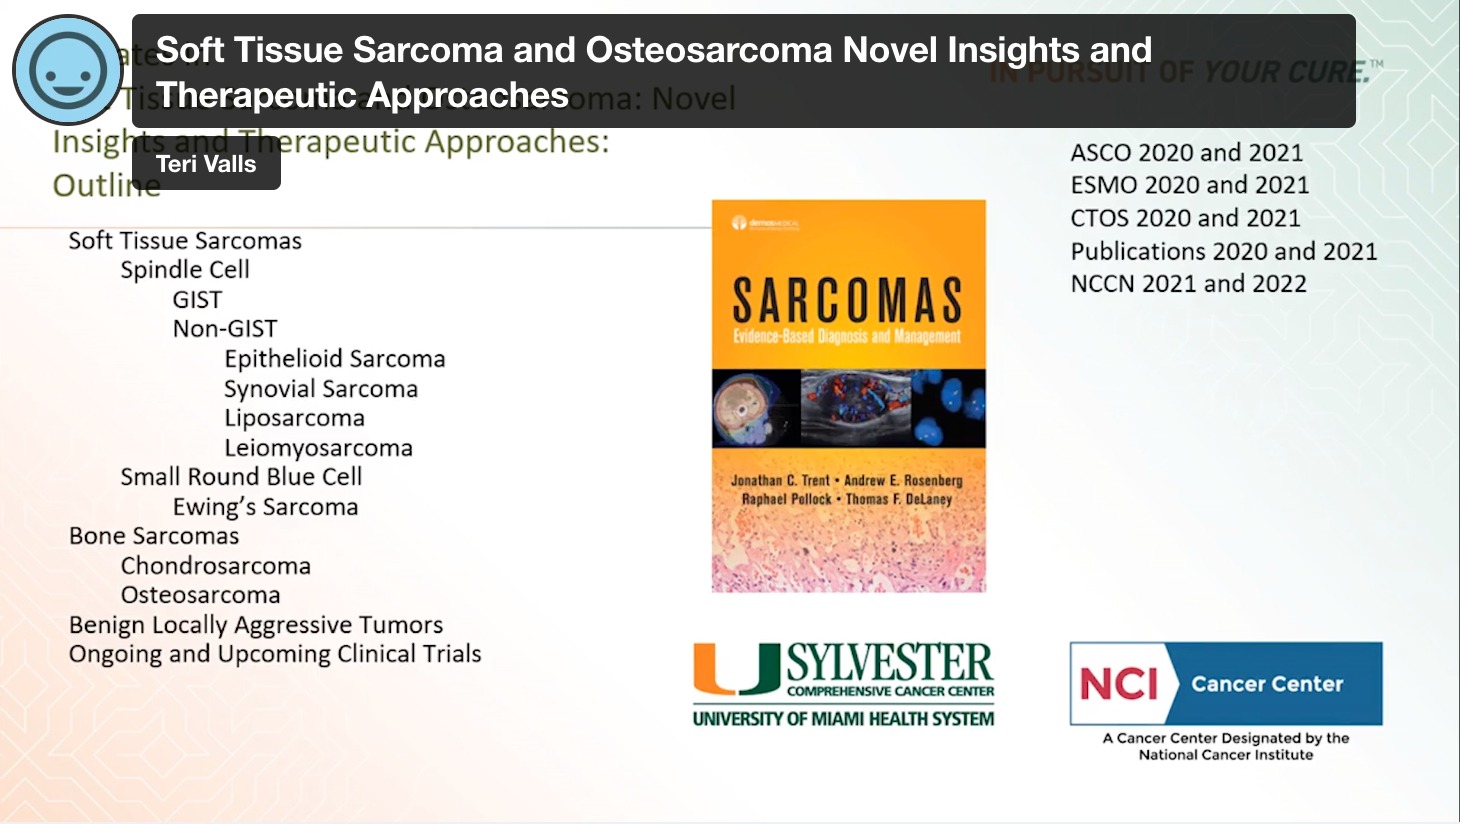 Soft Tissue Sarcoma and Osteosarcoma: Novel Insights and Therapeutic Approaches